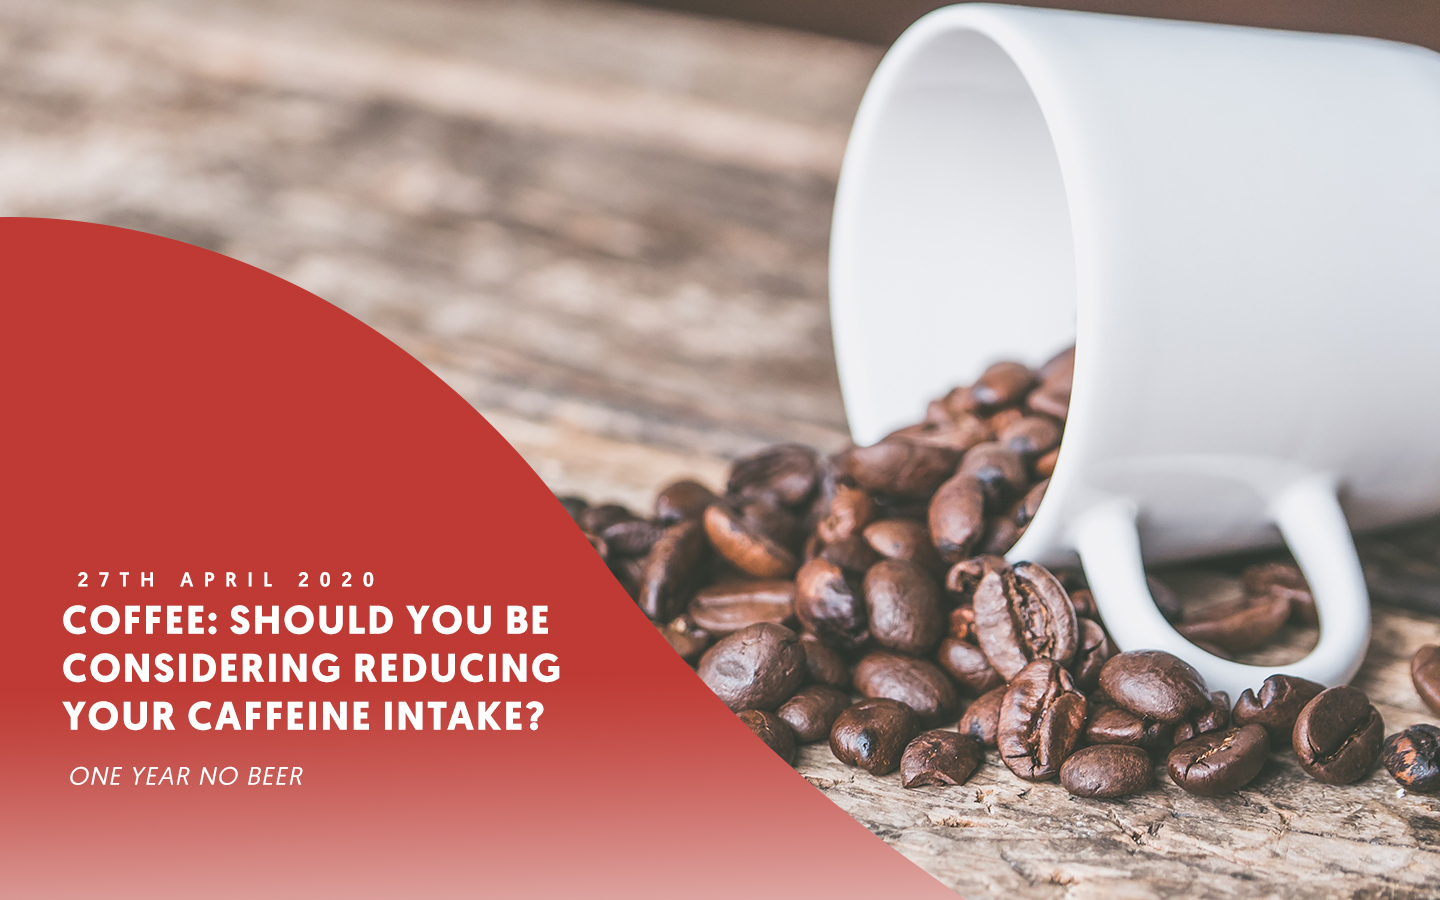 Coffee: Should you be considering reducing your caffeine intake?